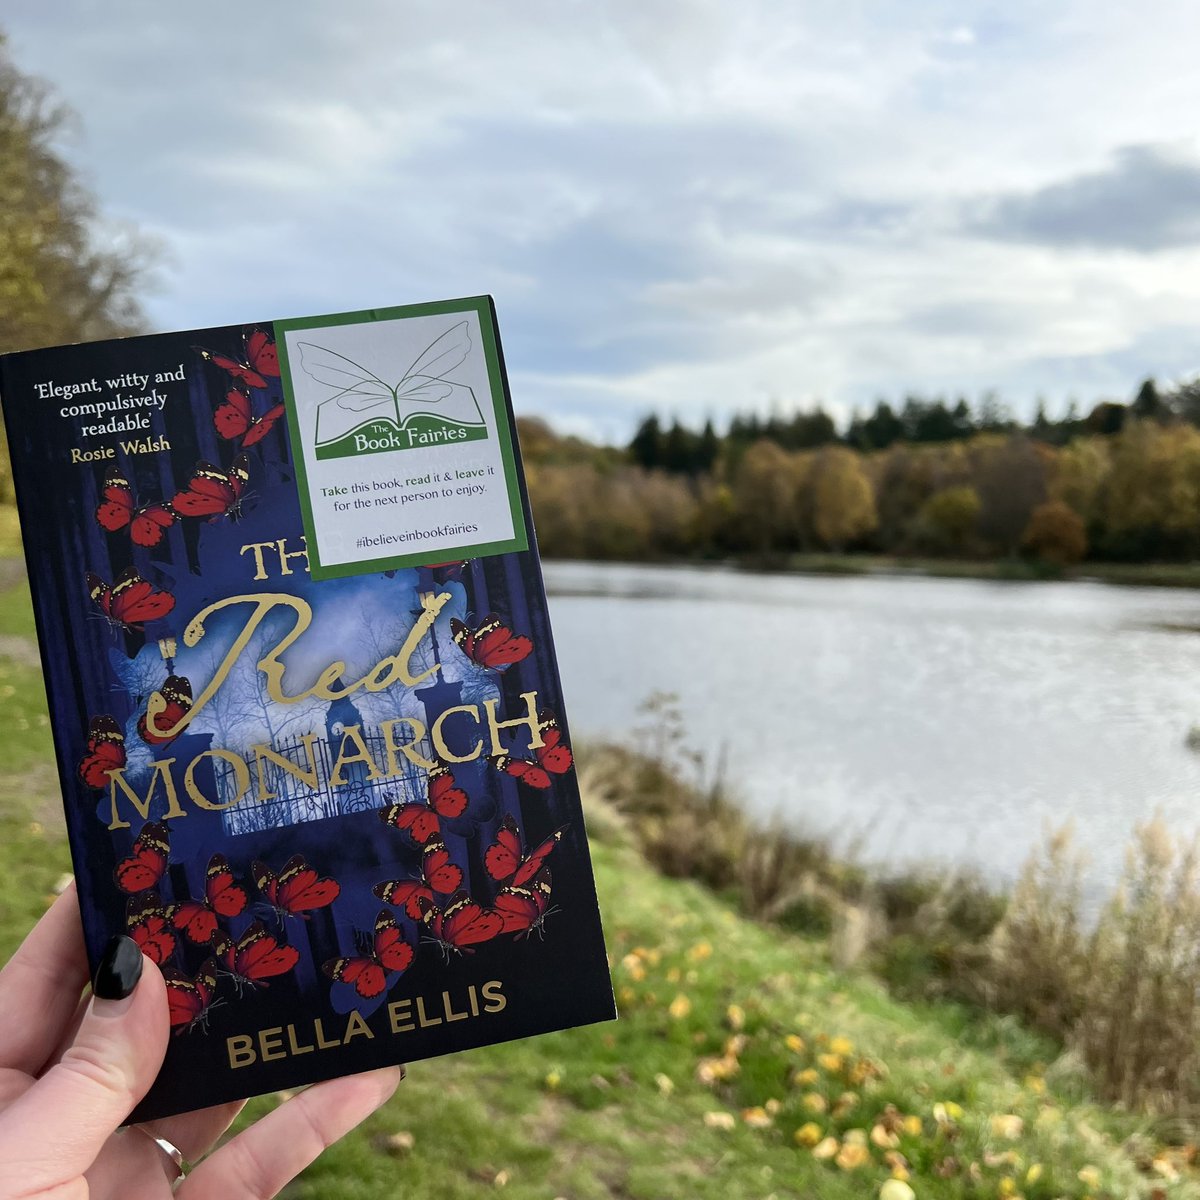 #TheBookScaries are out in force with some great books! This book fairy has left a copy of The Red Monarch by Bella Ellis in Callendar Park
#ibelieveinbookfairies #BookFairiesFalkirk #Falkirk #TheRedMonarch #BellaEllis #TBFHodder #Halloween  #ScaryBooks #Samhain